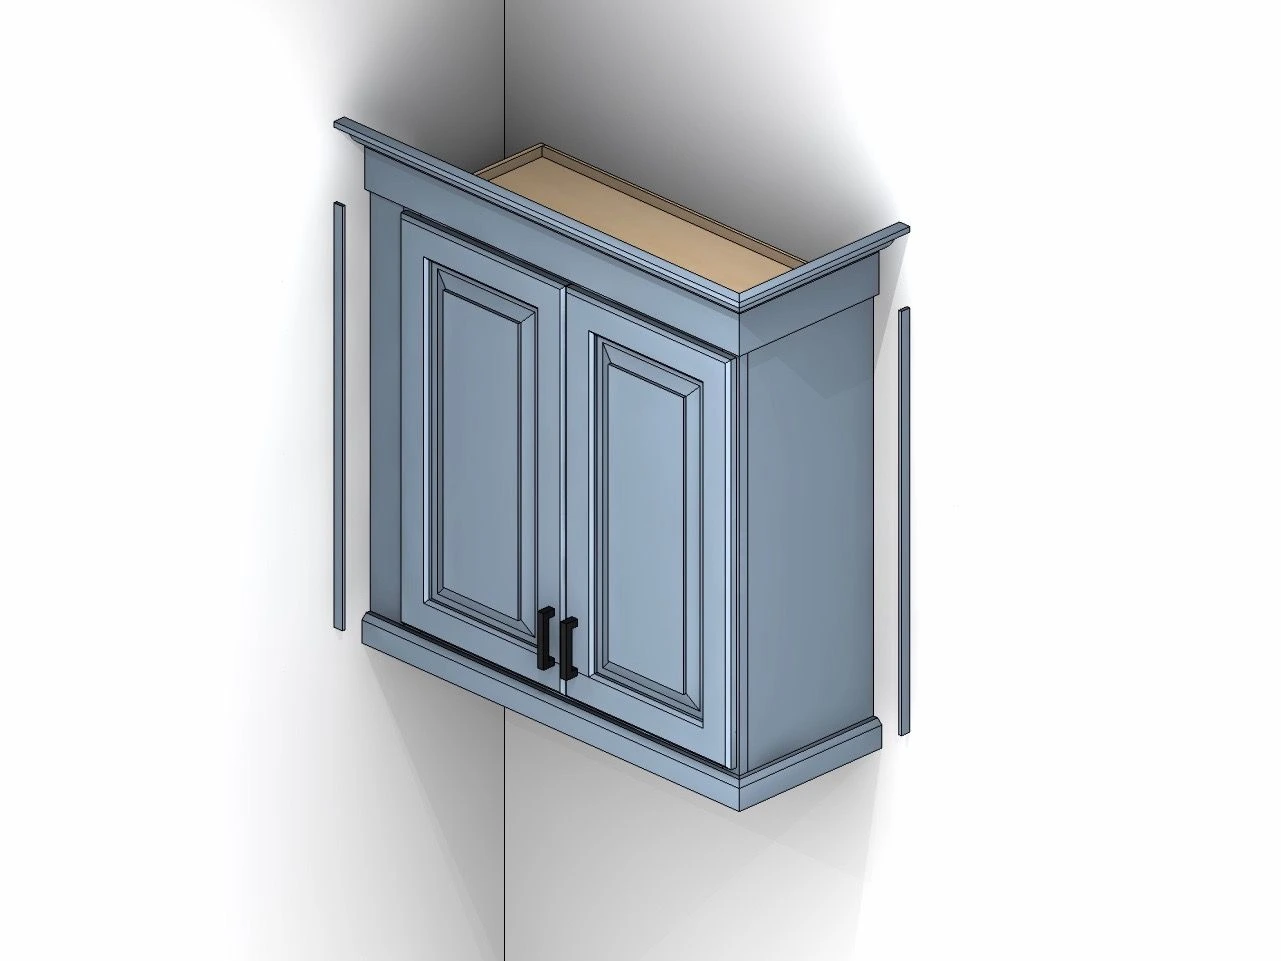 scribe molding for cabinets